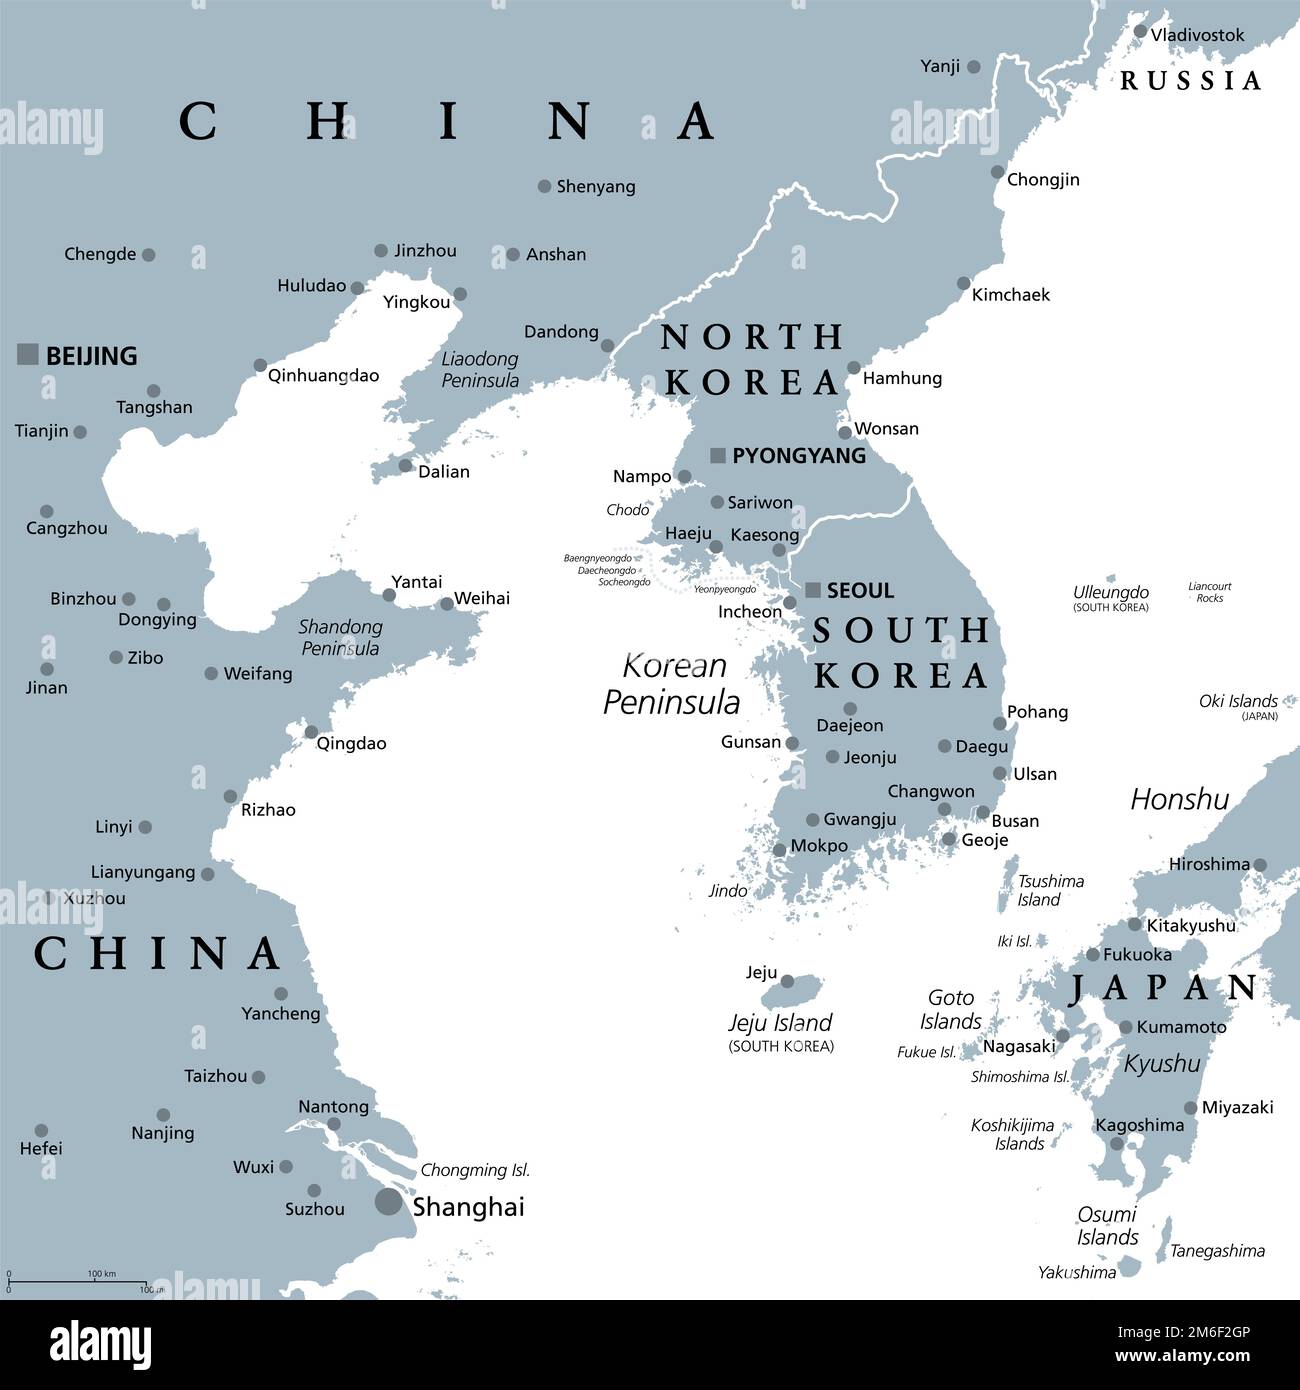 Korean Peninsula region, gray political map. Peninsular region Korea in East Asia, divided between North and South Korea, bordered by China and Russia. Stock Photo